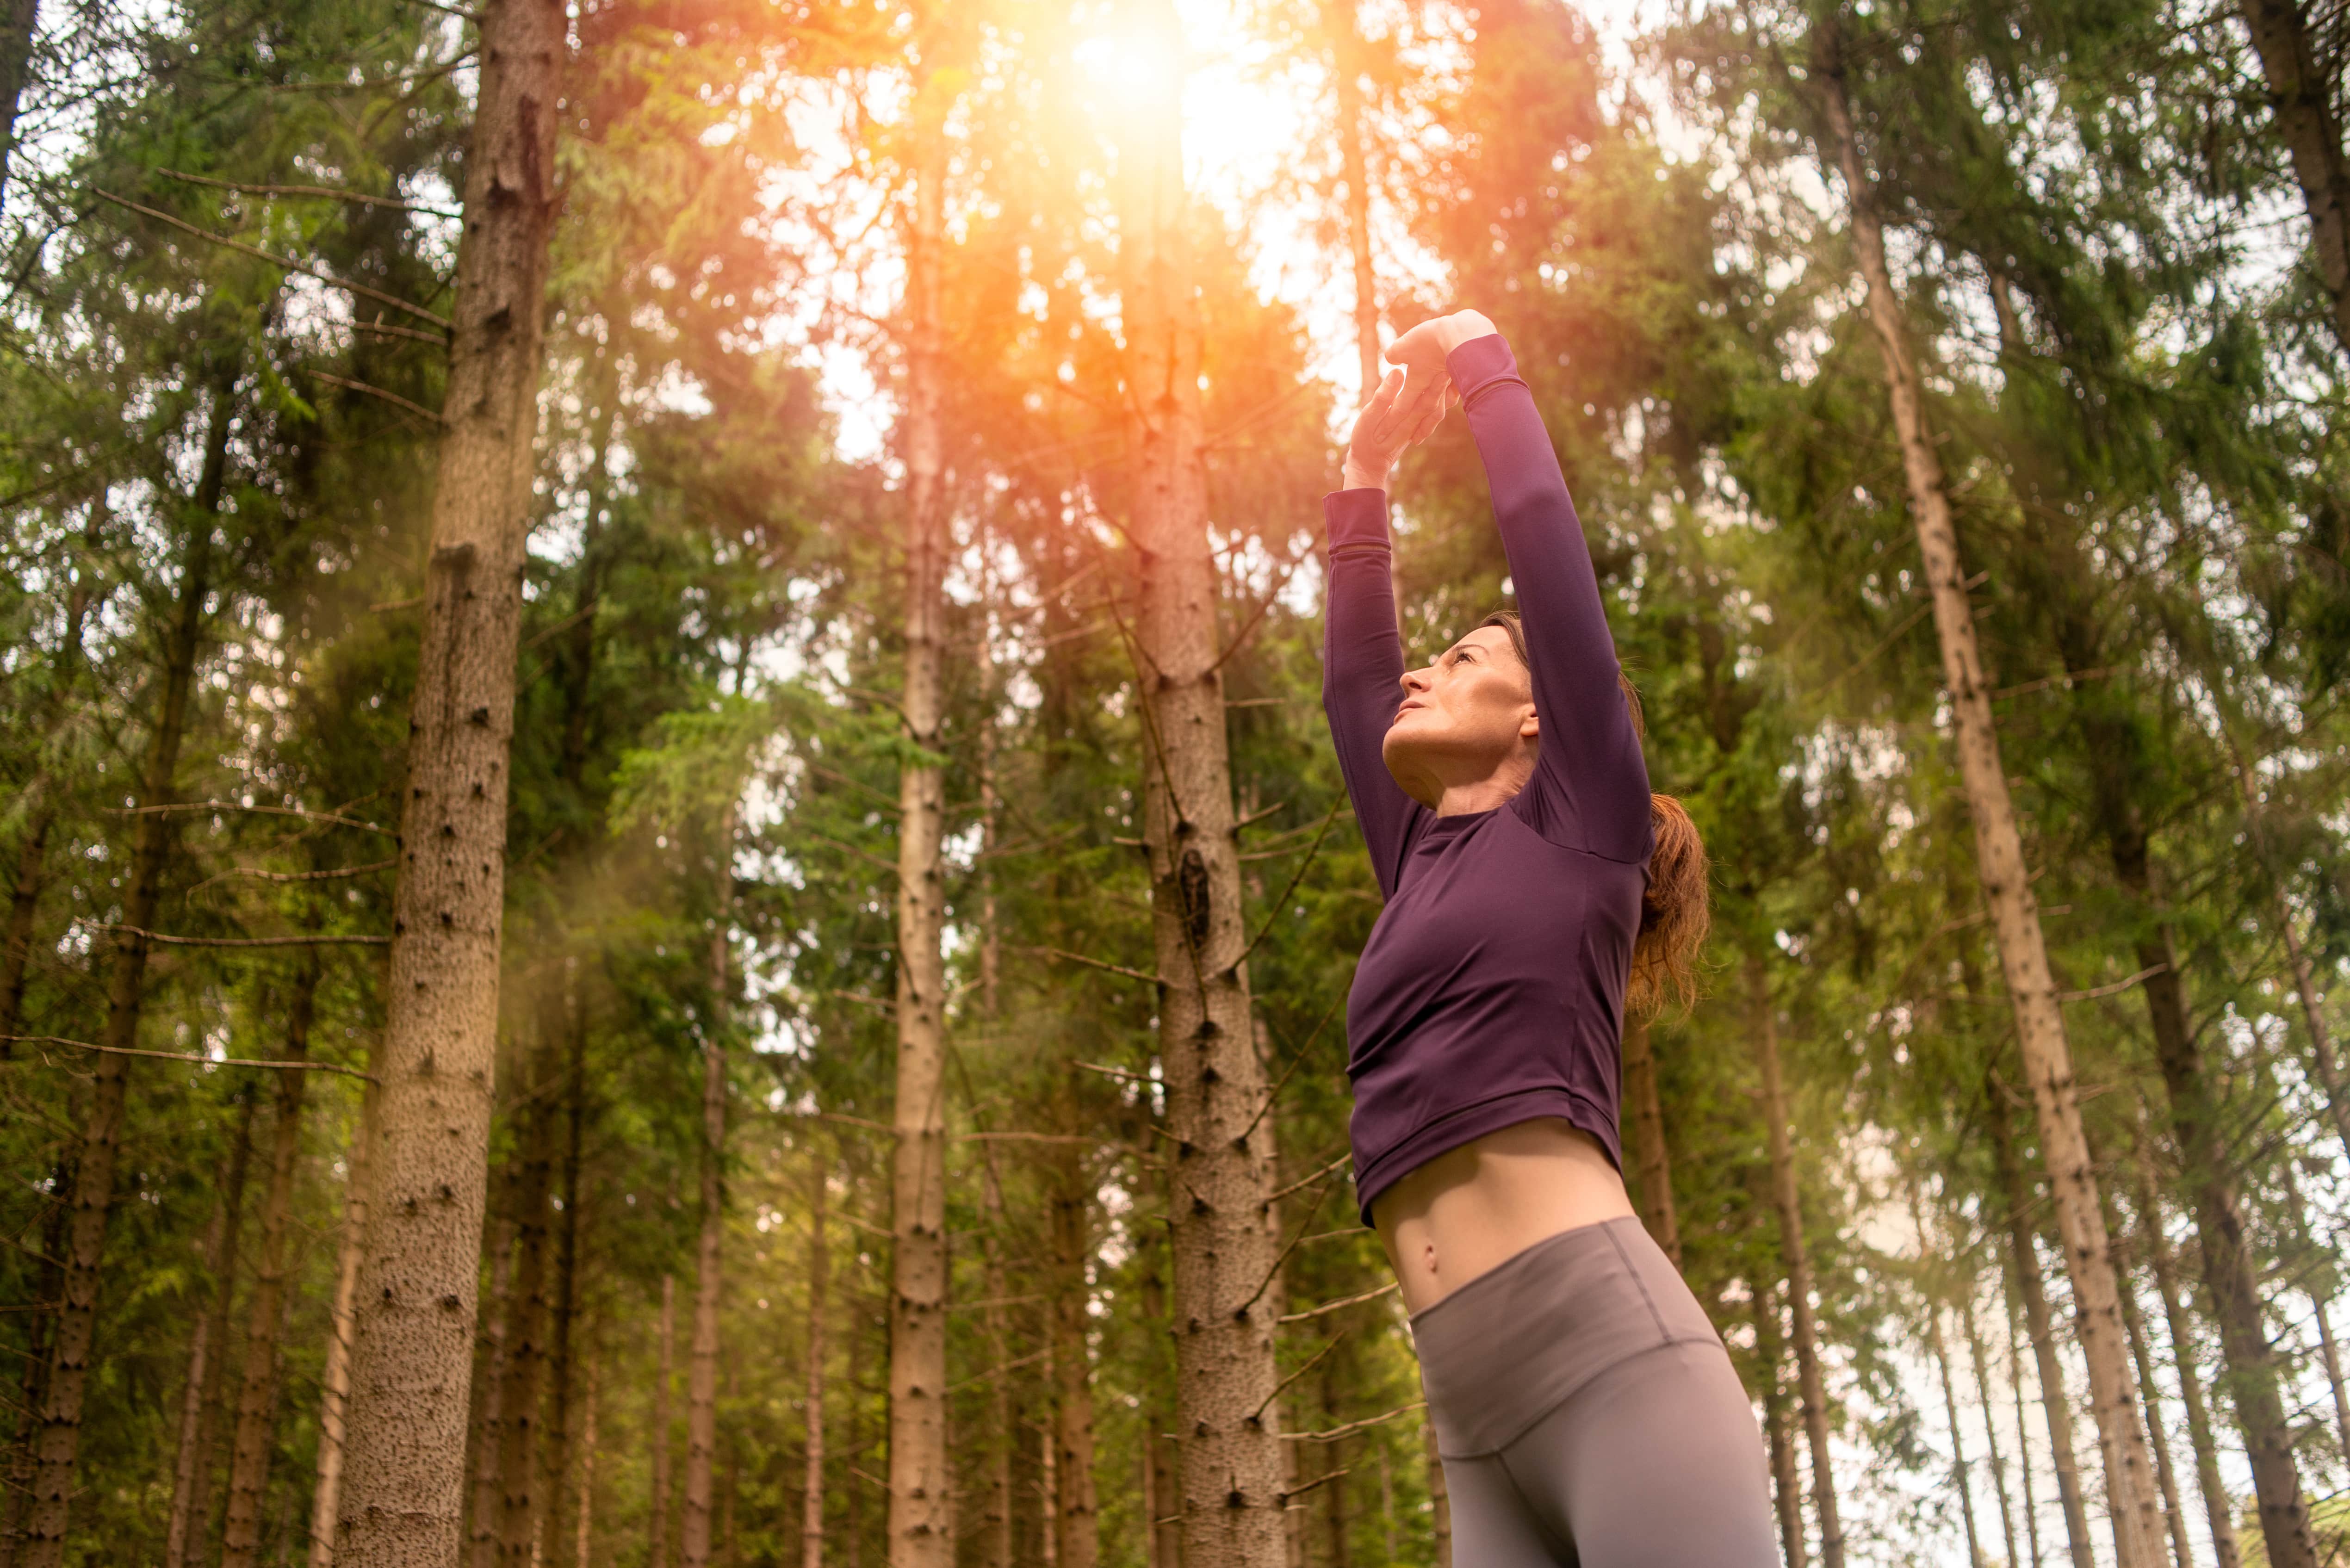 A woman stretching before a morning run in the woods, her arms are raised upwards towards the sky and the sunrise is visible in the canopy of the trees